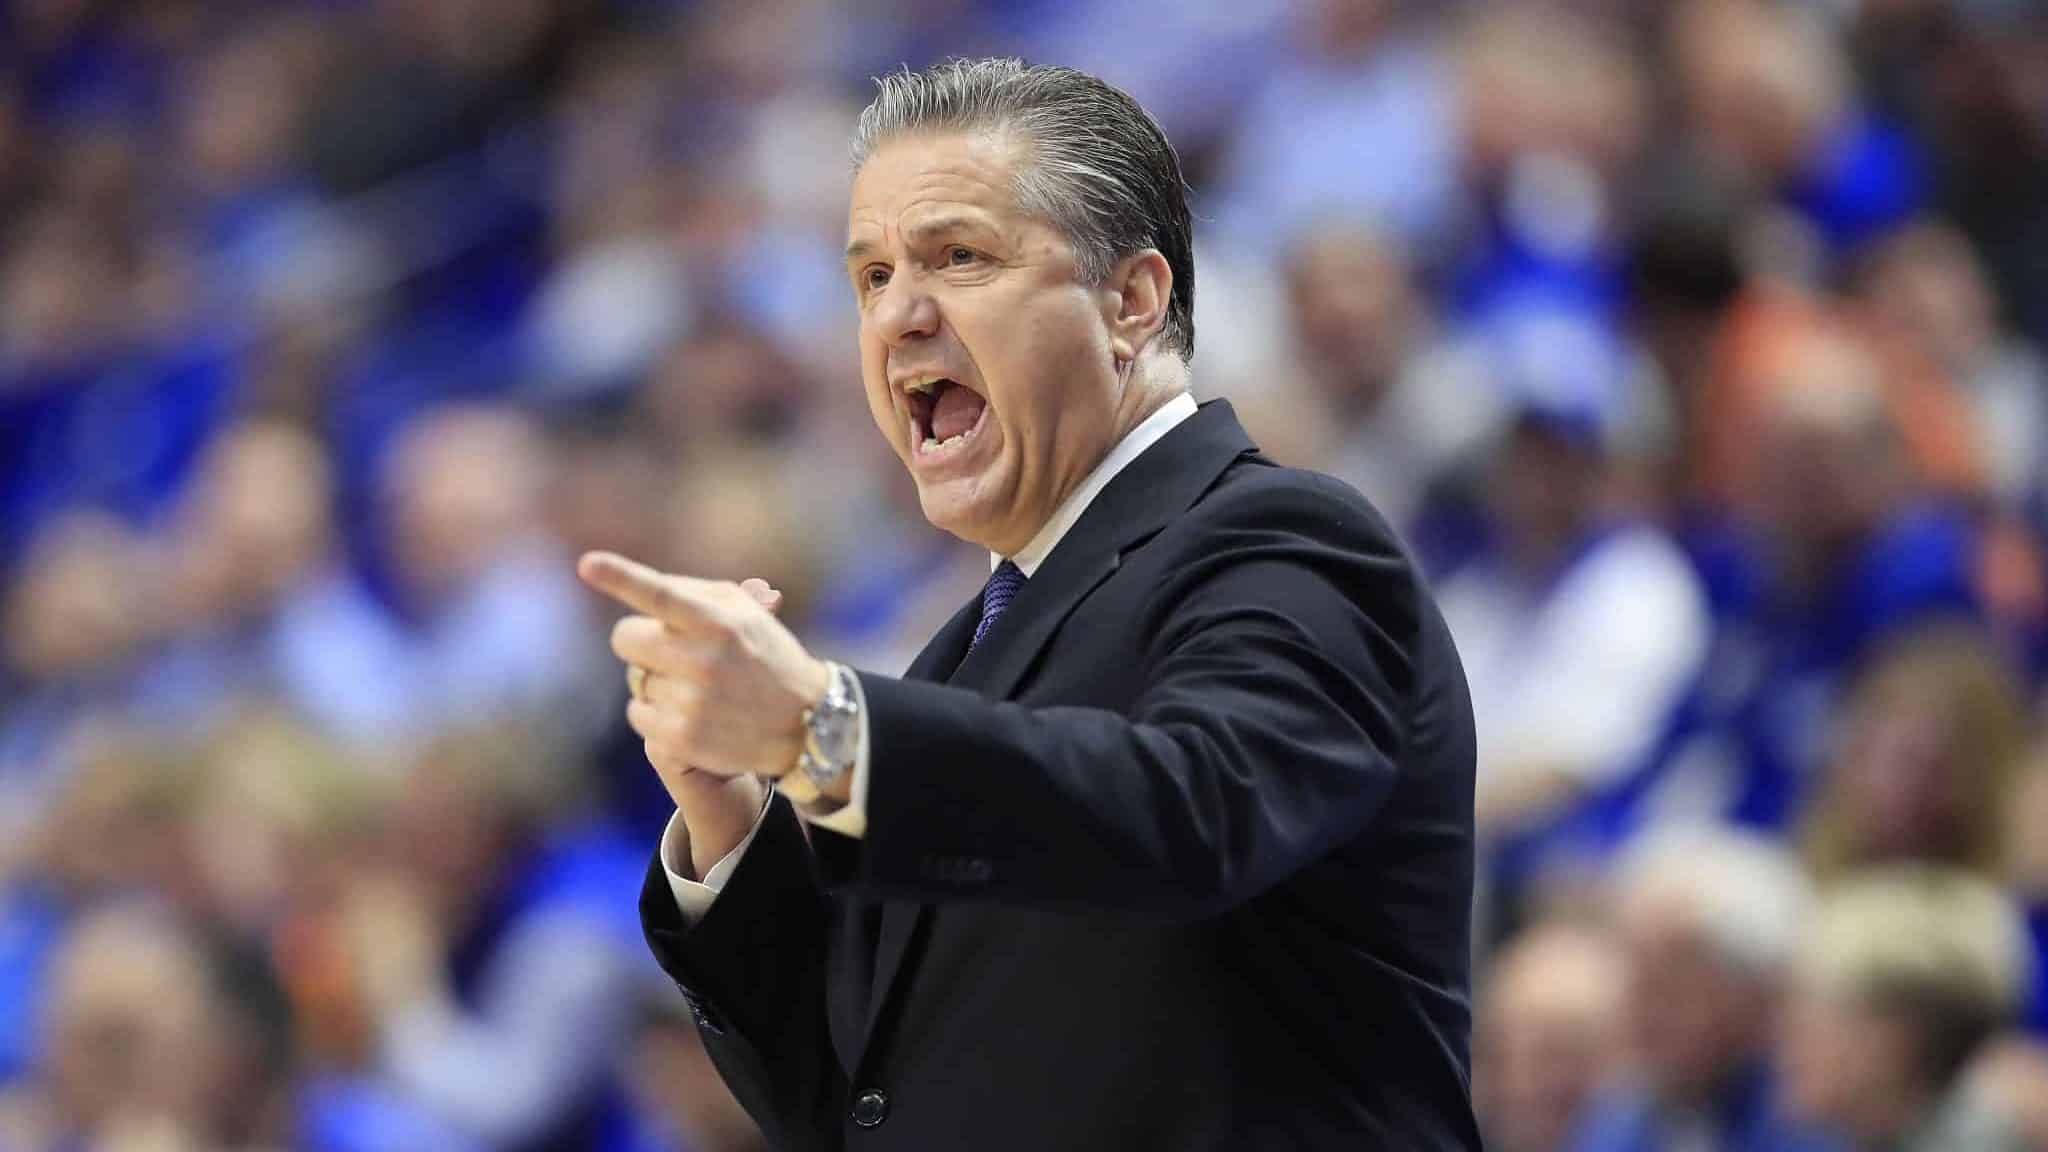 LEXINGTON, KENTUCKY - MARCH 03: John Calipari the head coach of the Kentucky Wildcats gives instructions to his team against the Tennessee Volunteers at Rupp Arena on March 03, 2020 in Lexington, Kentucky.